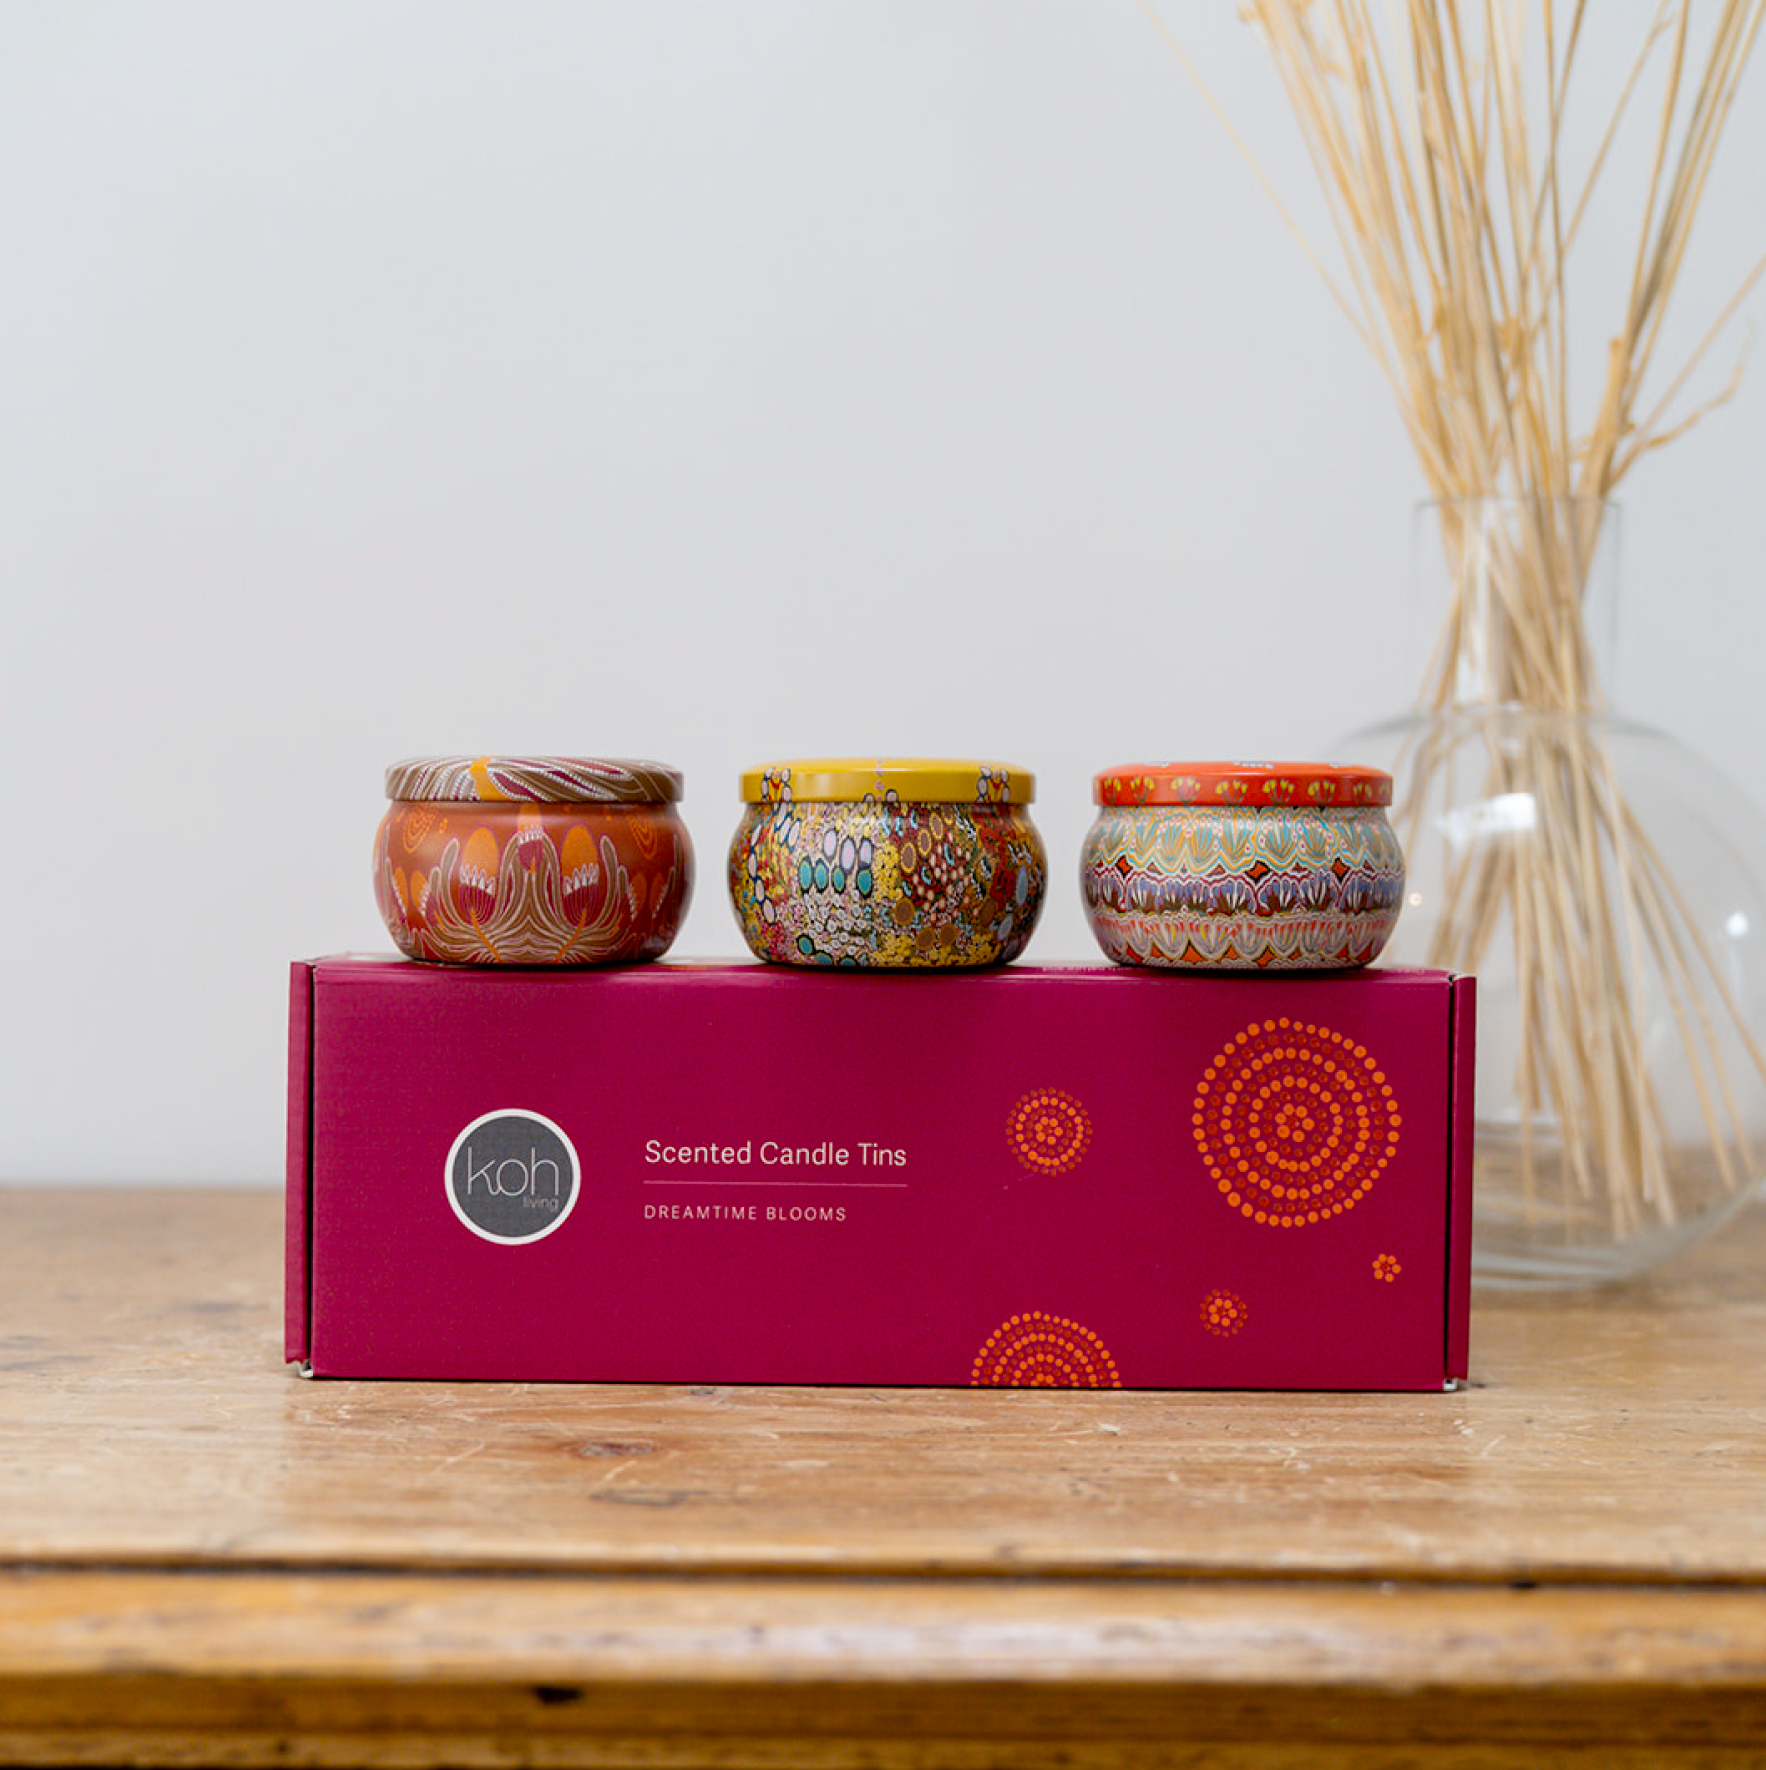 MOTHERS DAY GIFT IDEA - AUSTRALIAN NATIVE CANDLE GIFT SET FROM KOH LIVING